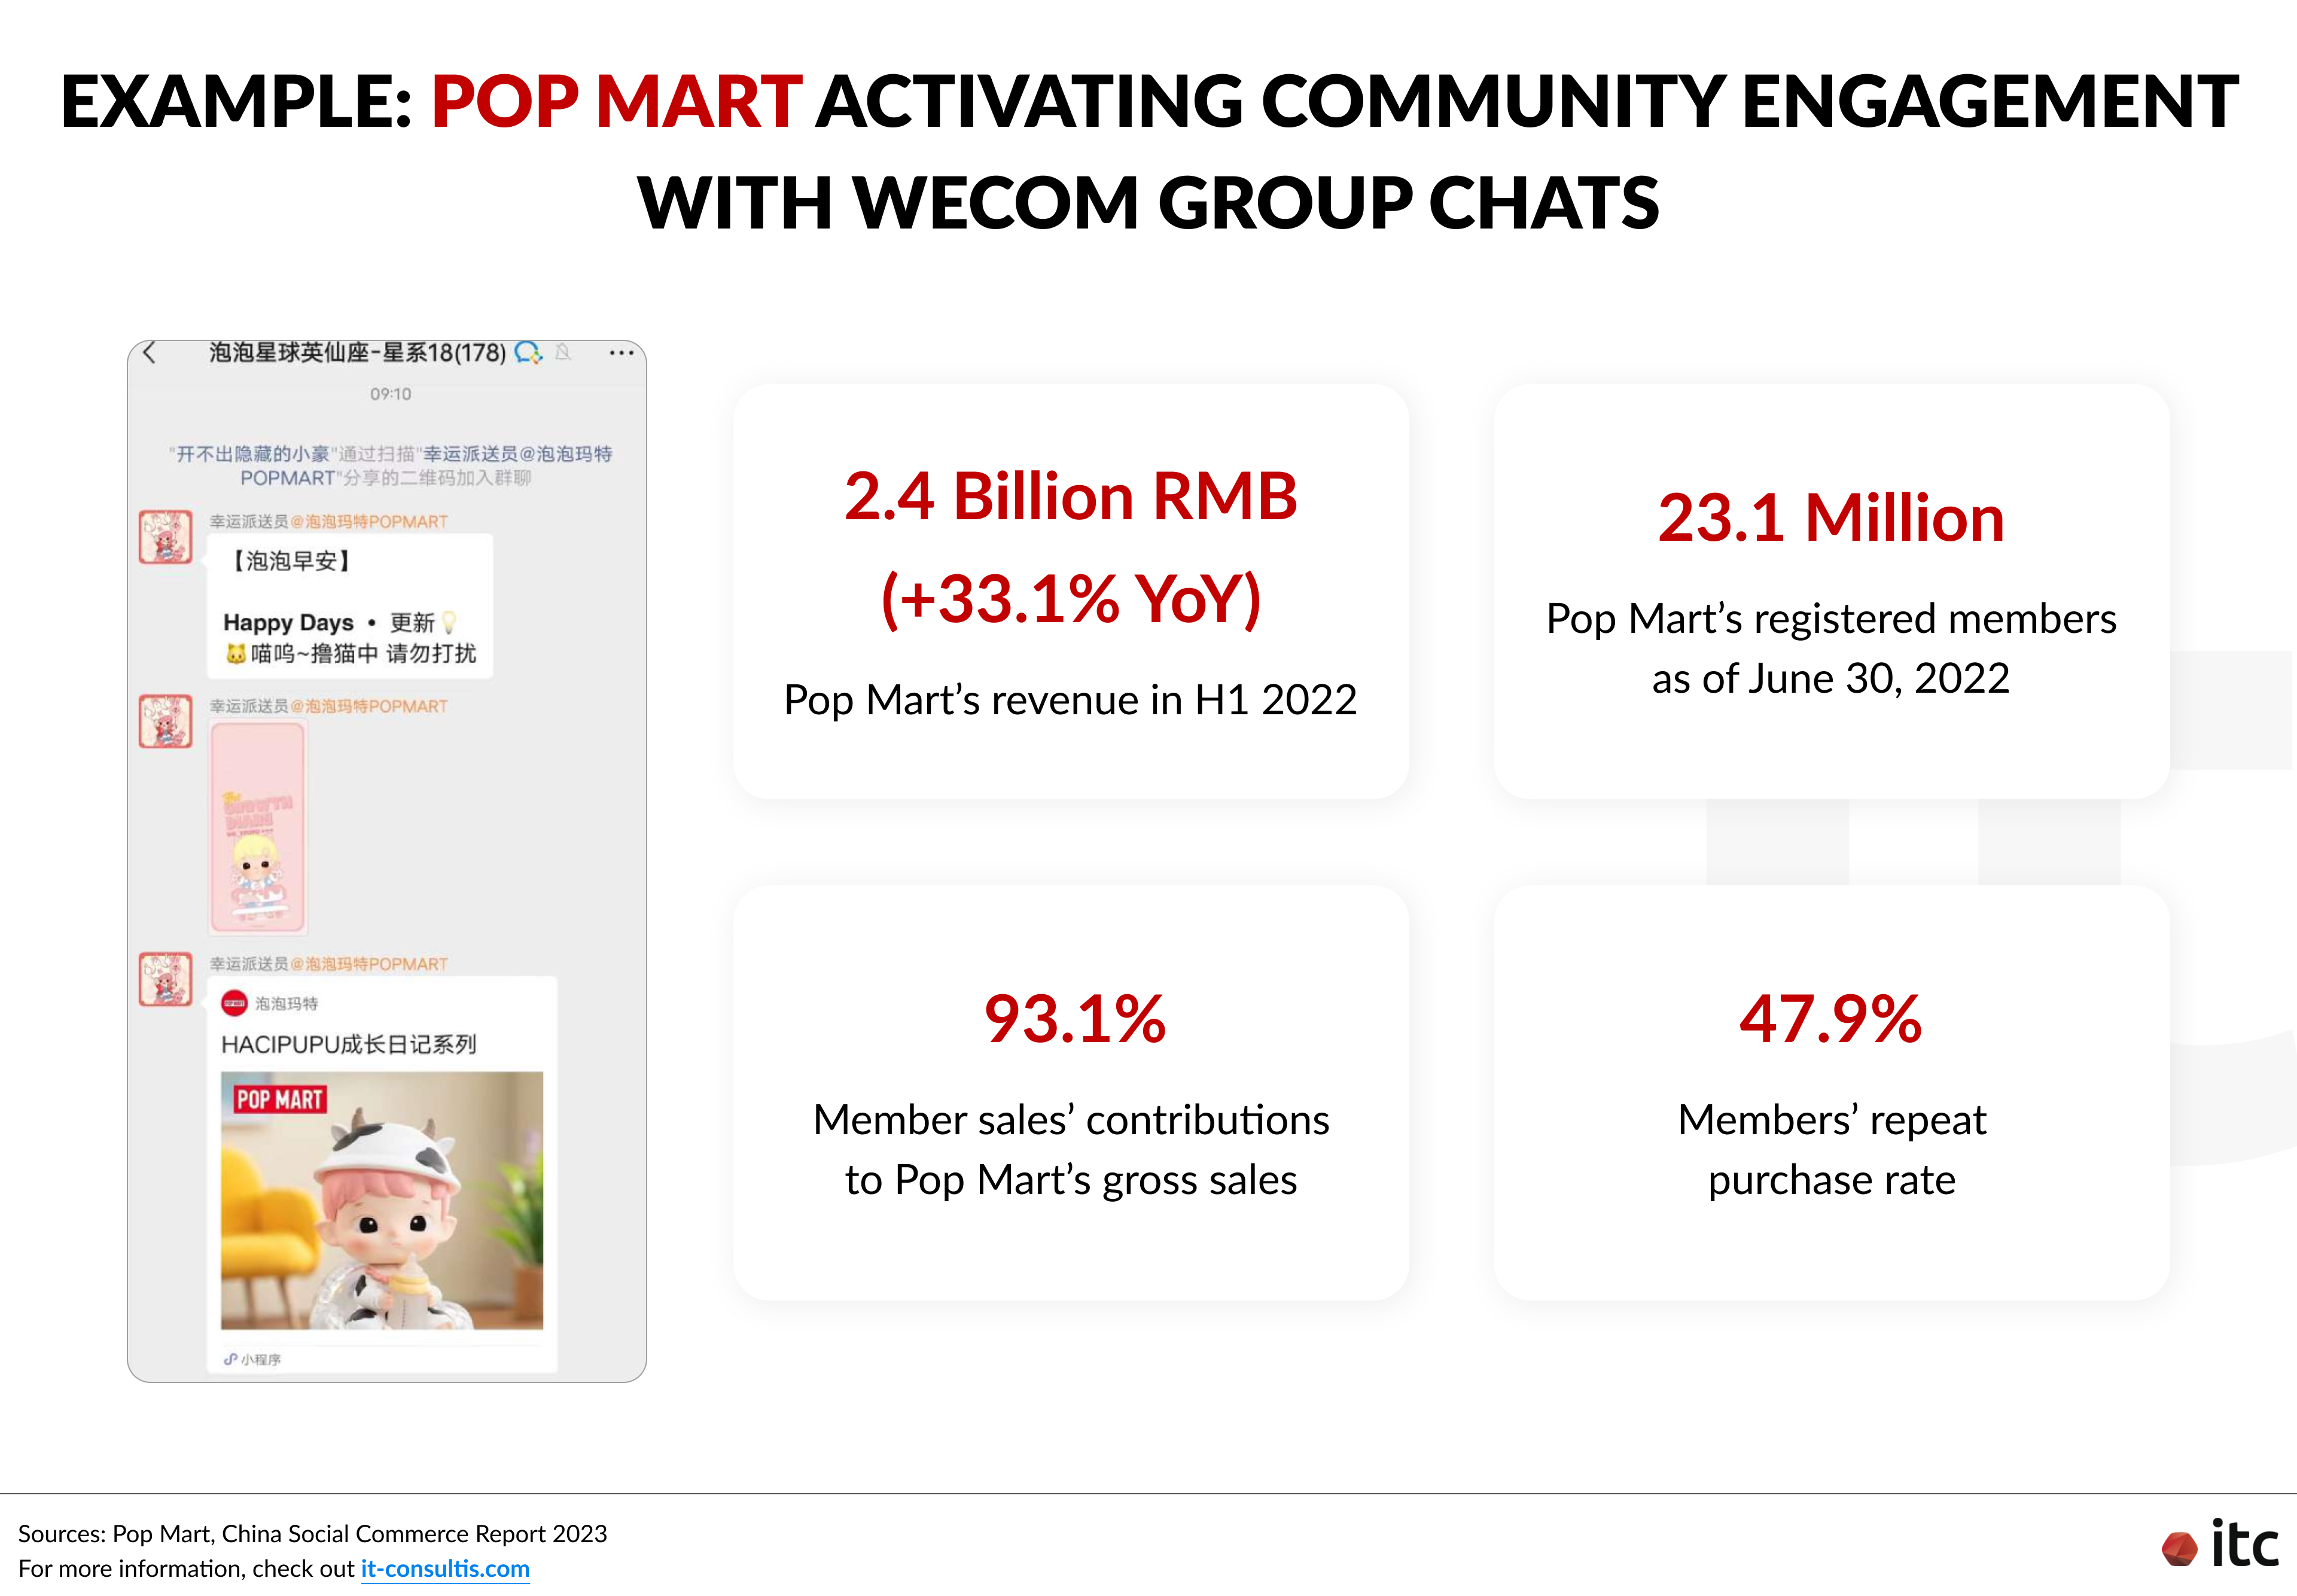 How Pop Mart activates community engagement in China via WeCom (WeChat Work) group chats